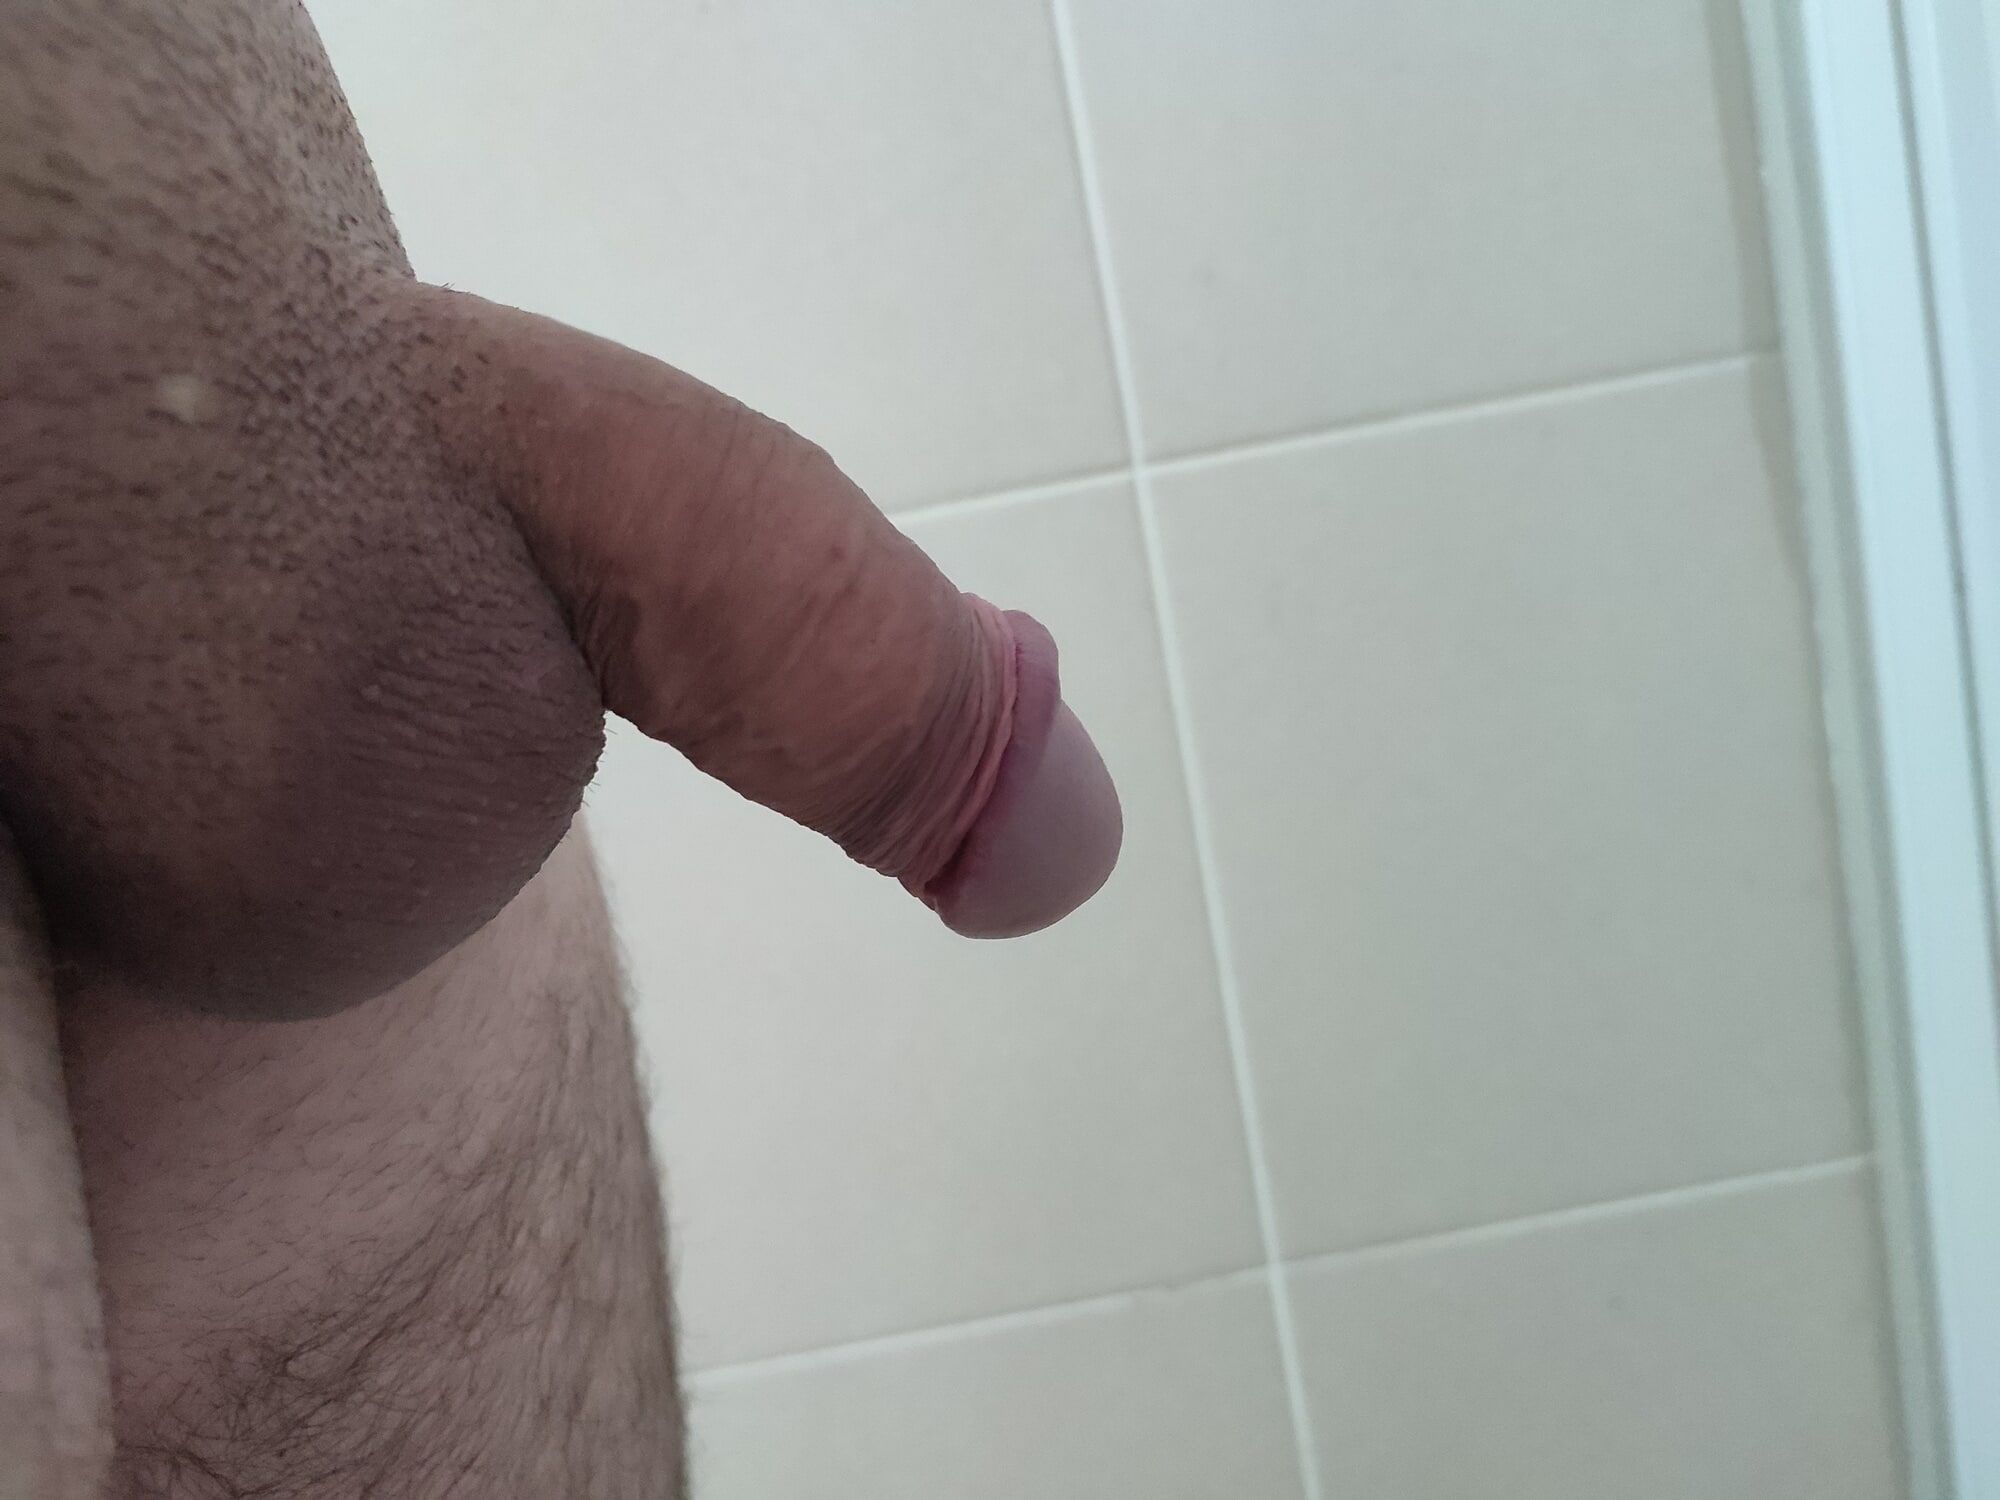 Shower time...play time